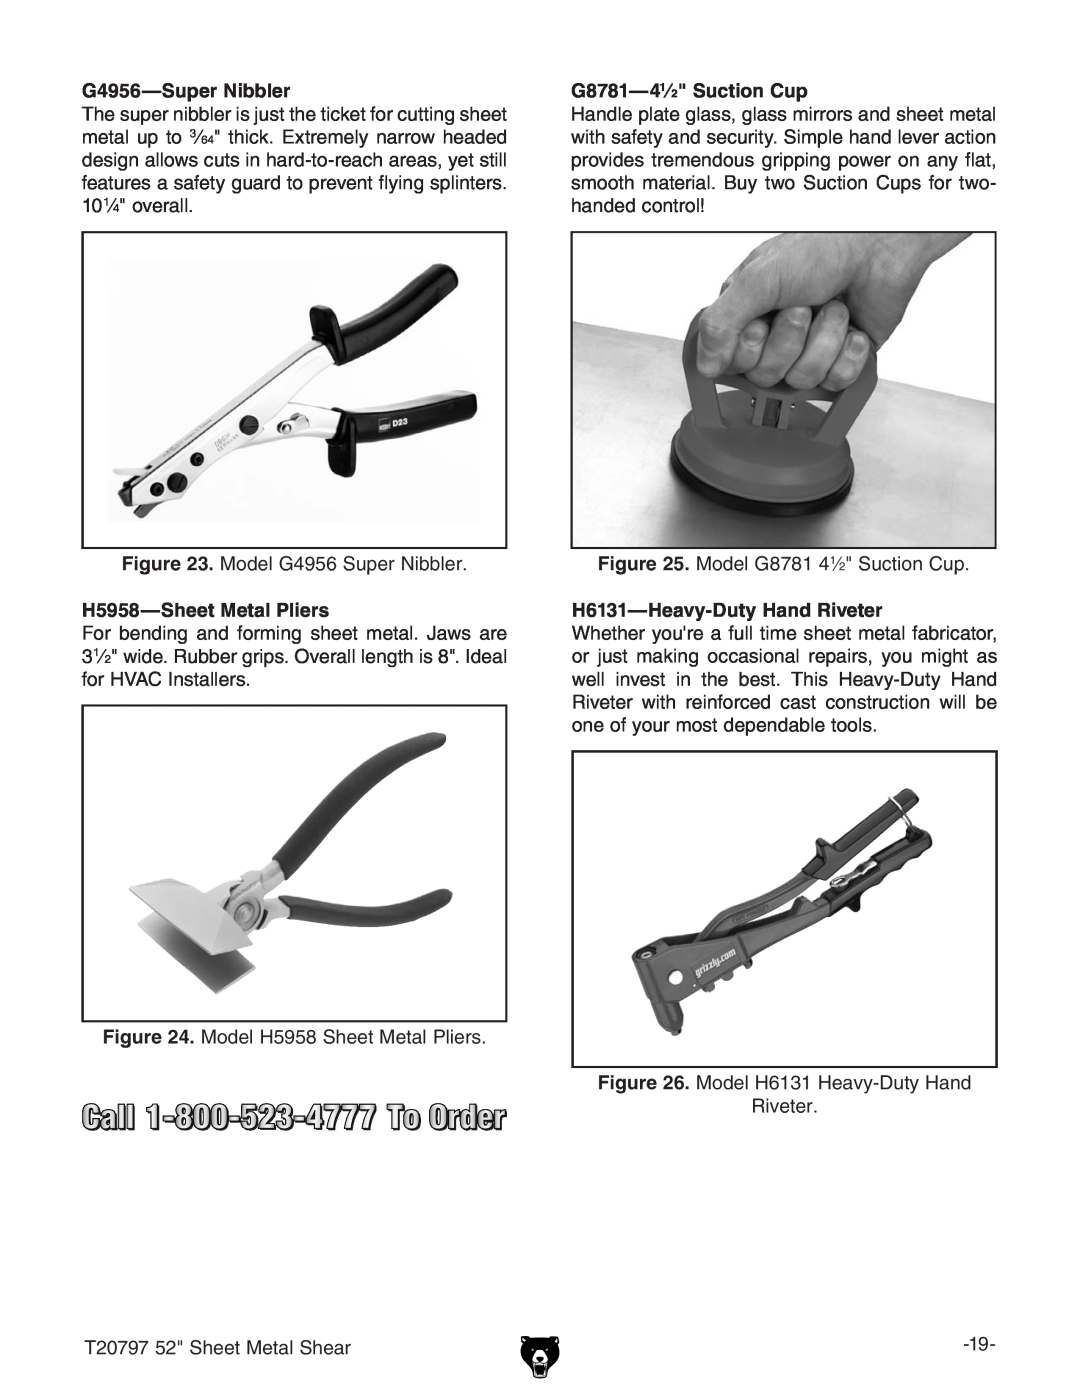 Grizzly T20797 owner manual G4956-Super Nibbler, BdYZa.*+HjeZgCWWaZg#, H5958-Sheet Metal Pliers, G8781-41⁄2 Suction Cup 